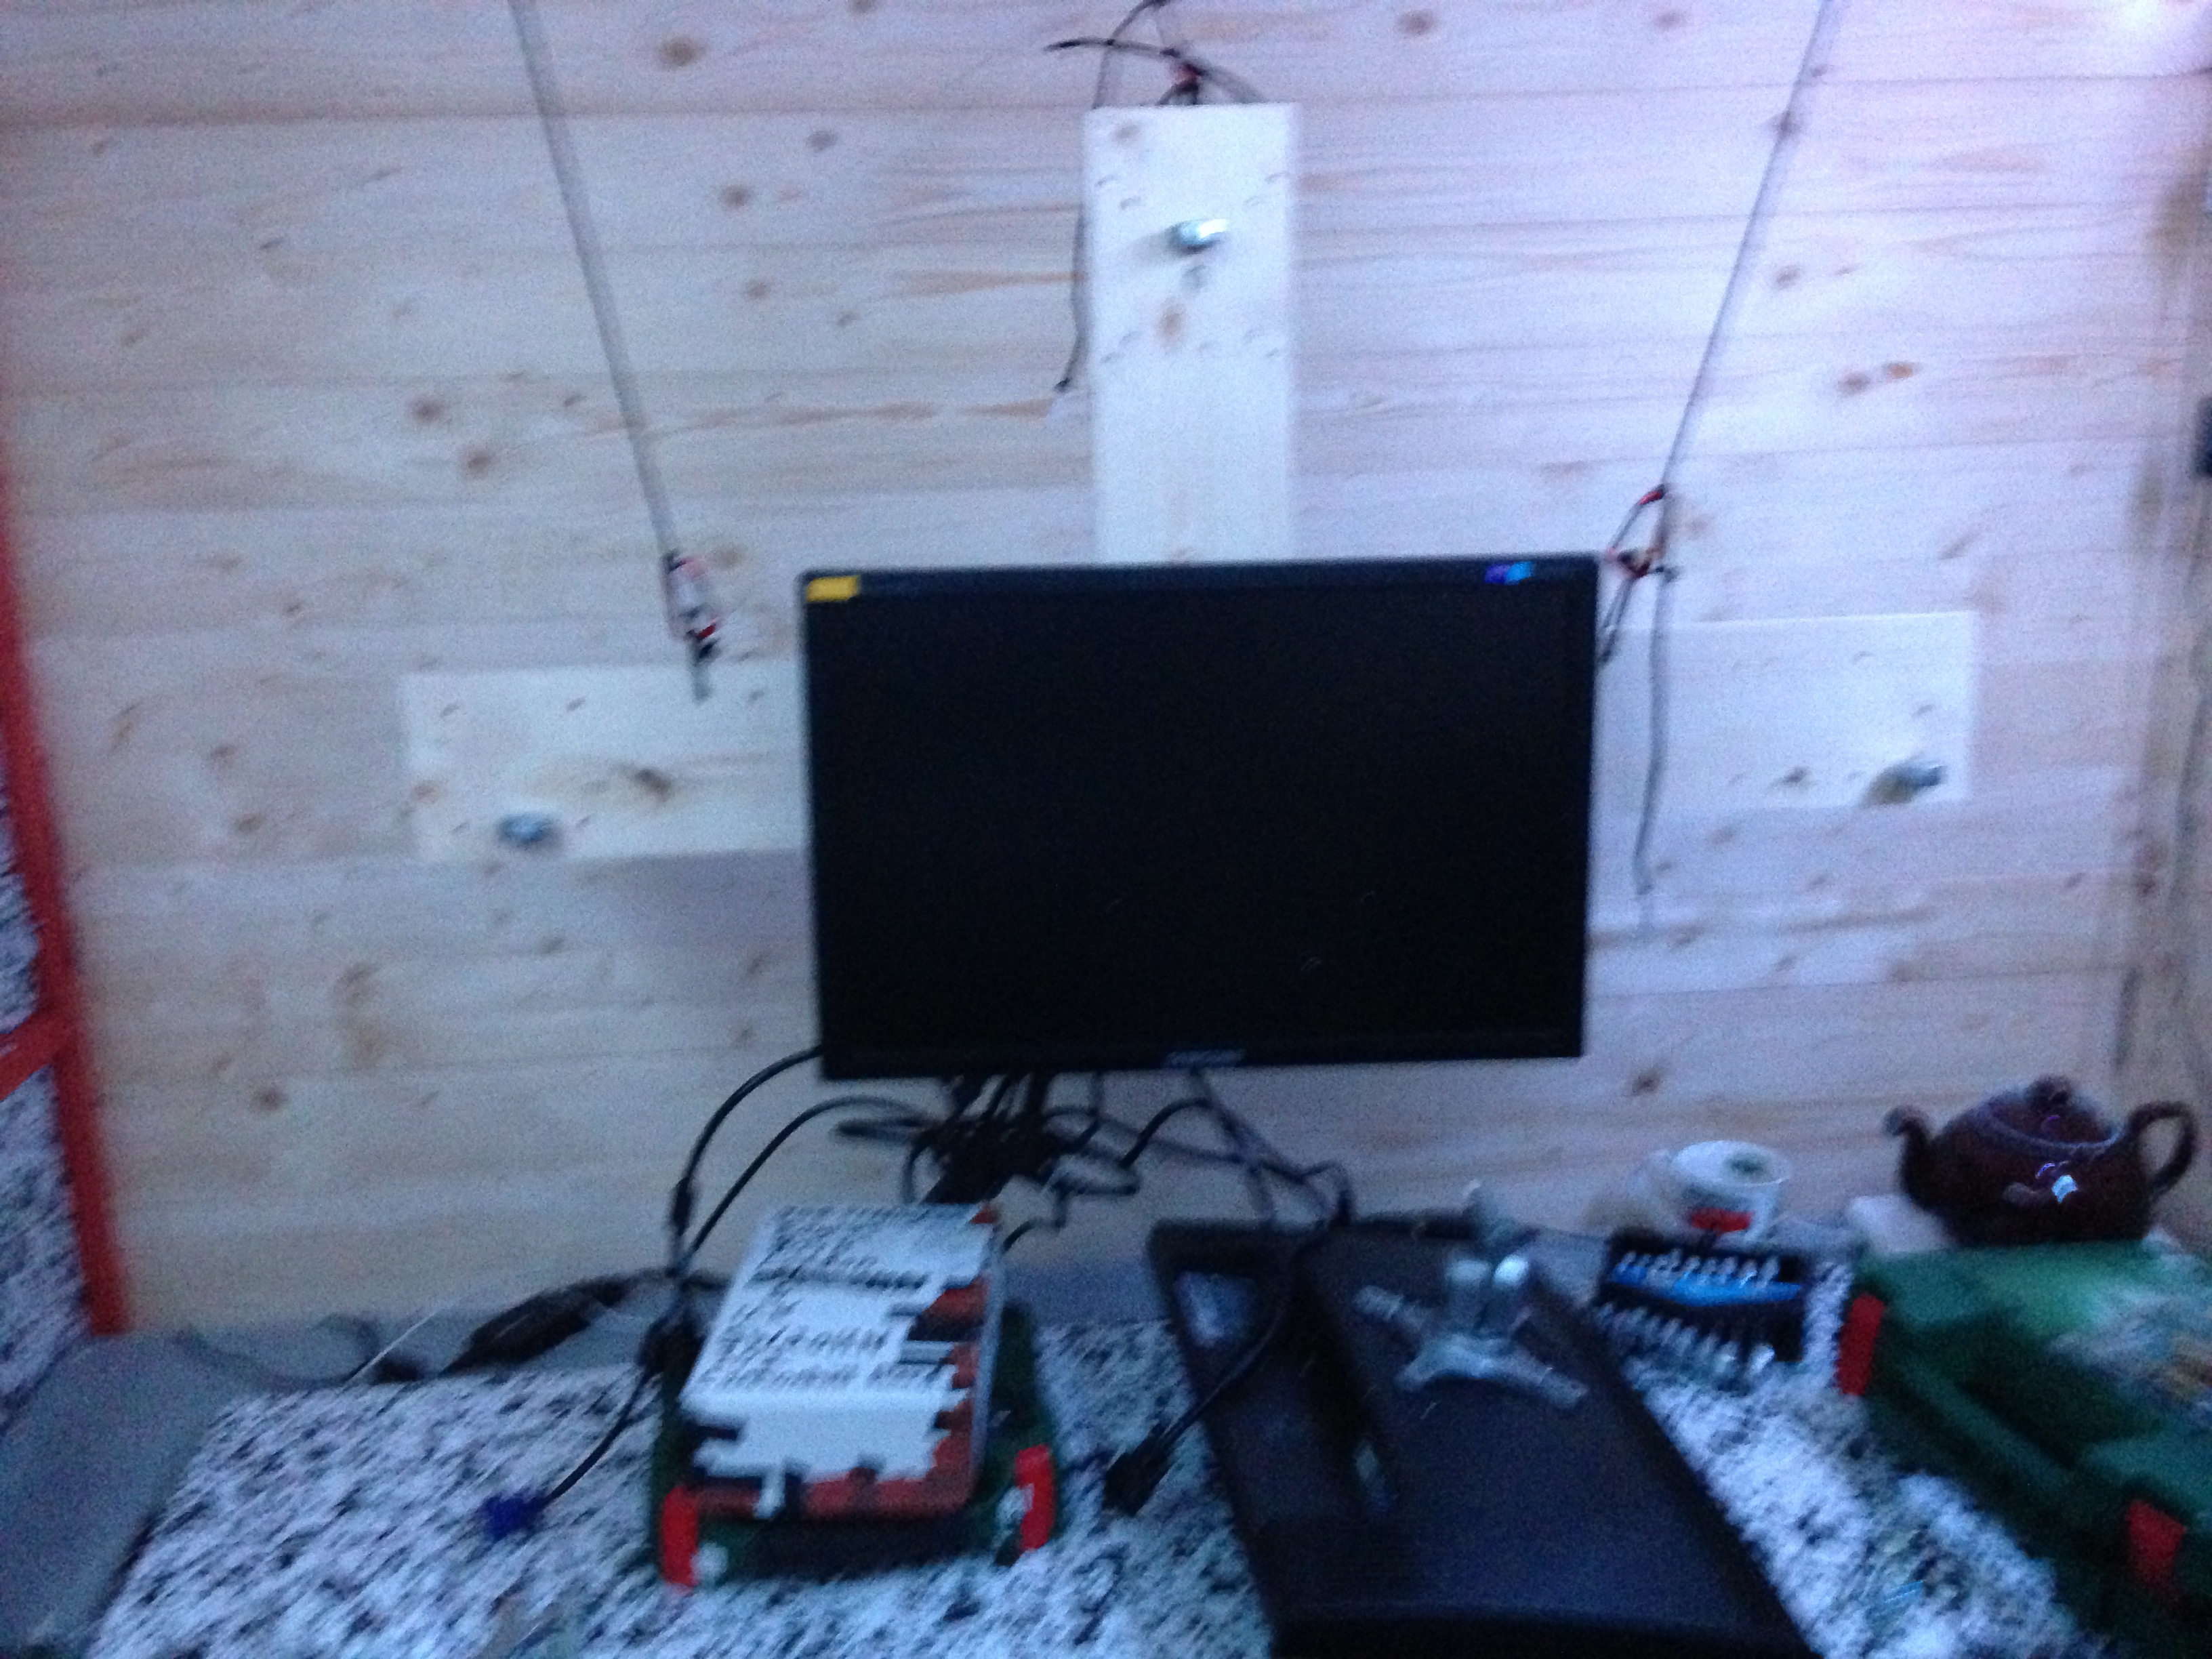 One monitor on the mounting